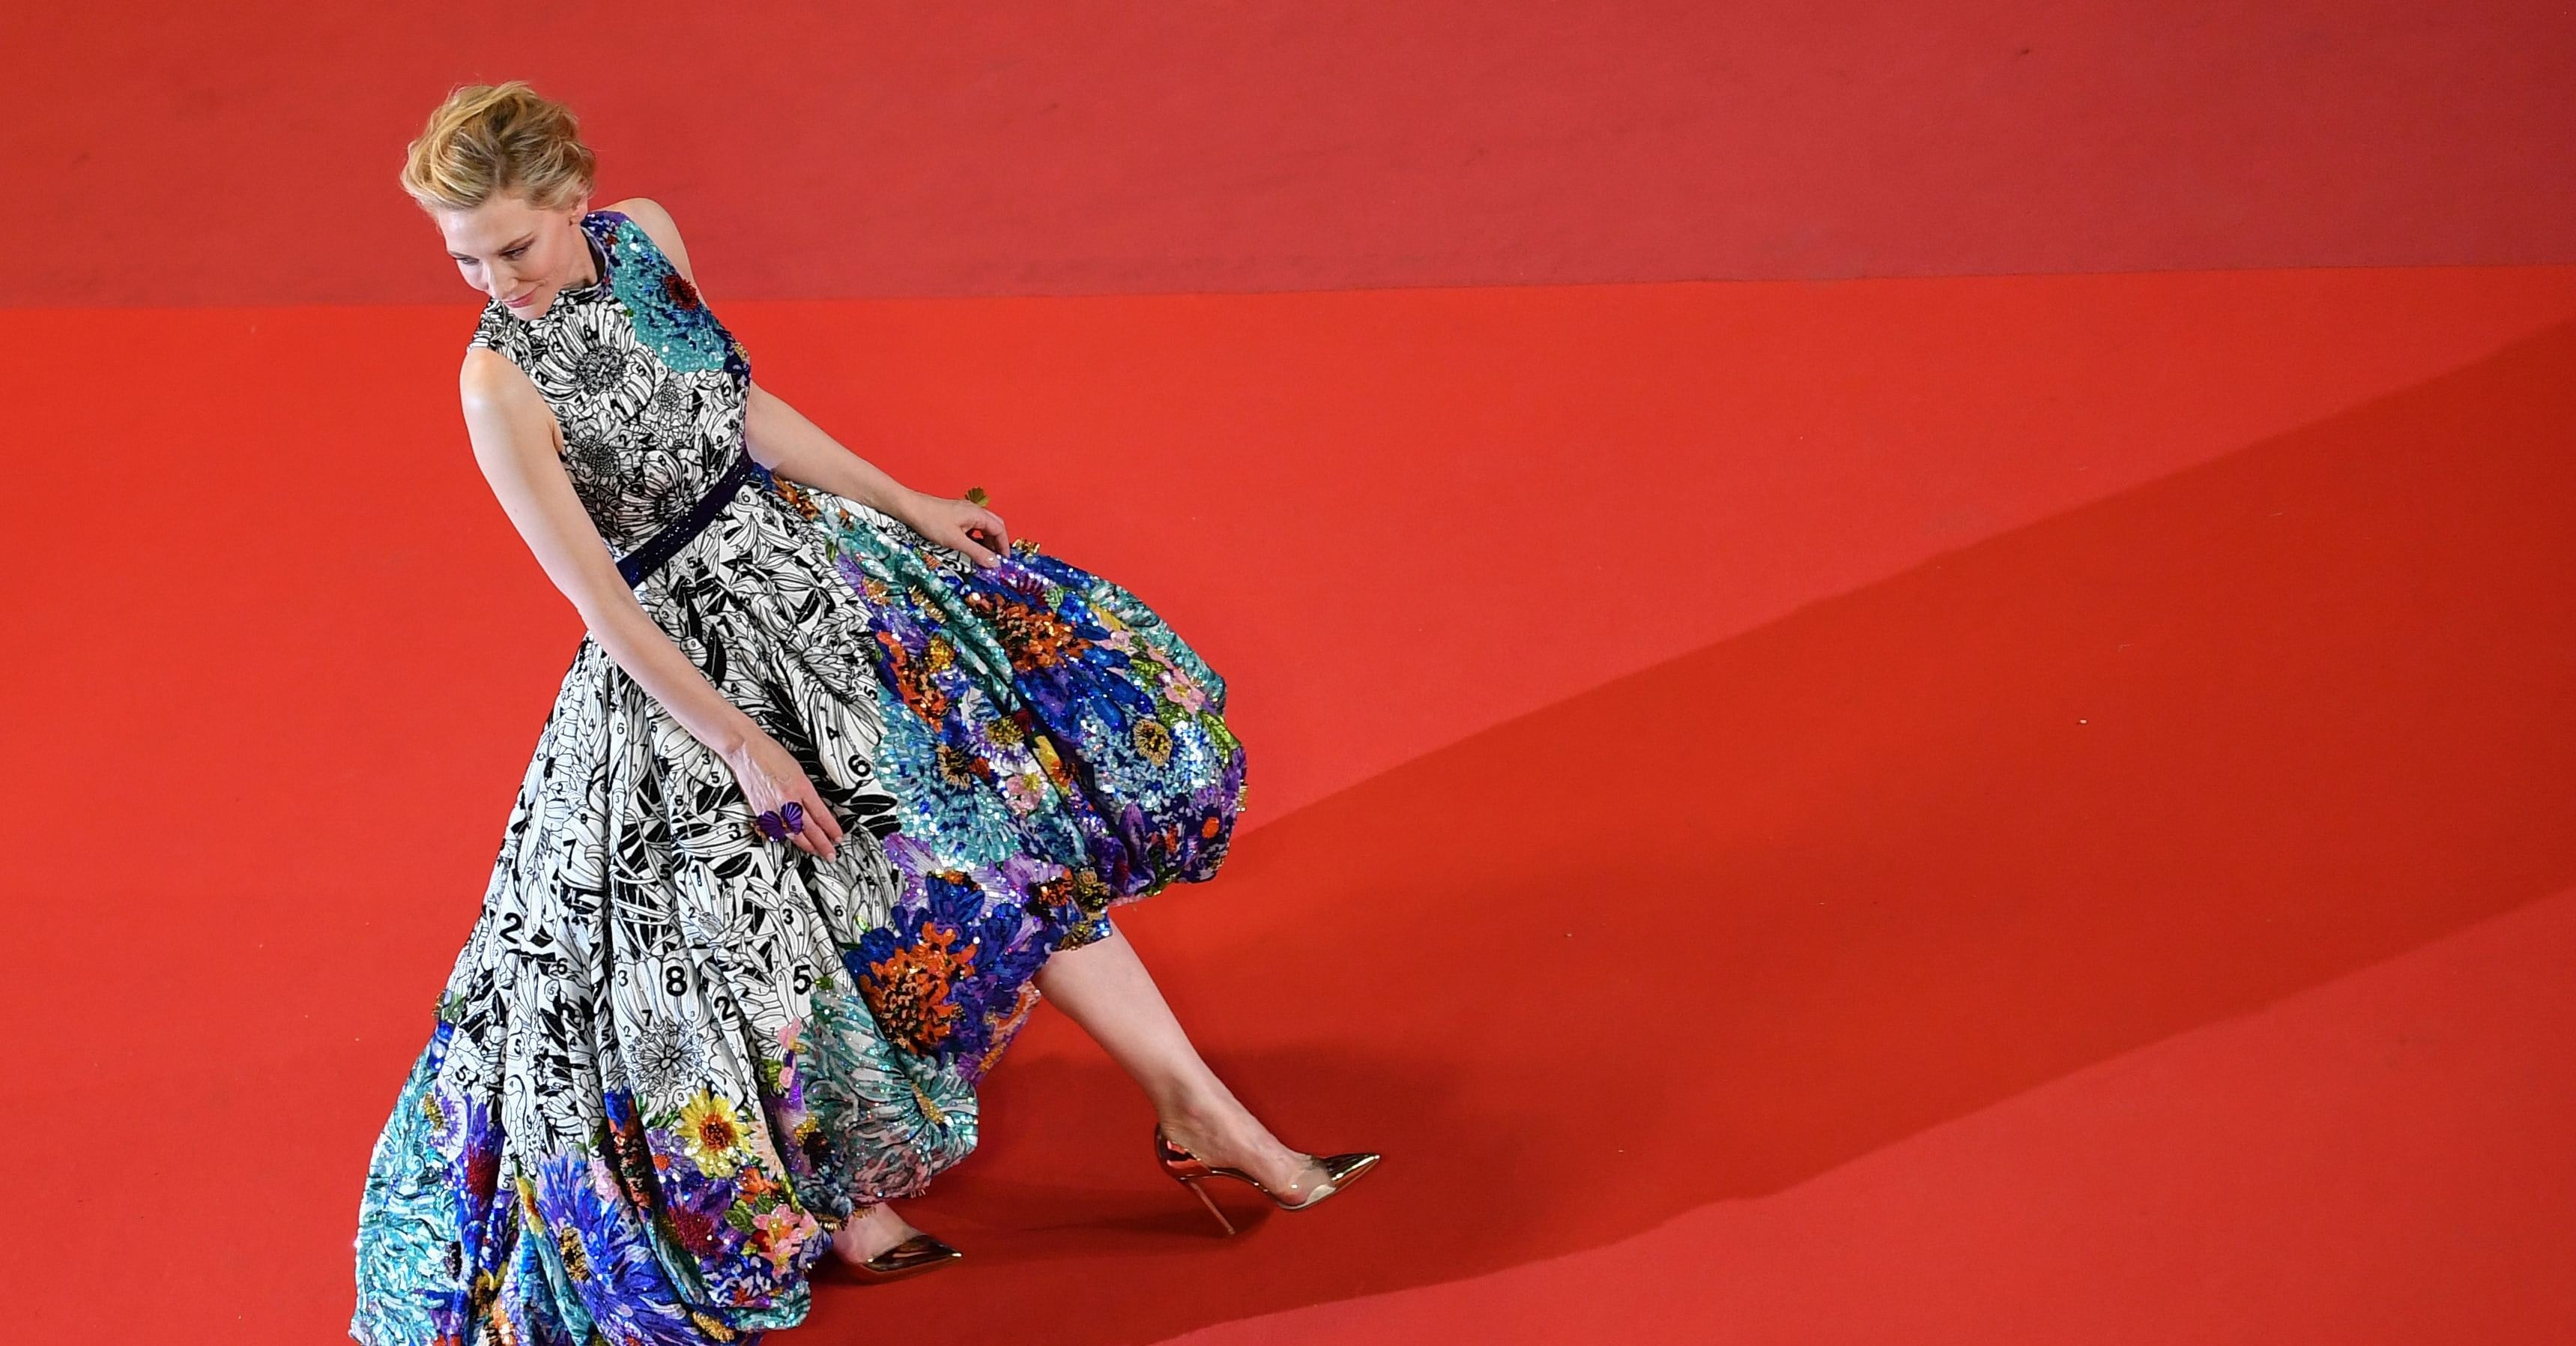 Cate Blanchett Shines in Louis Vuitton Dress at Cannes Film Festival – WWD